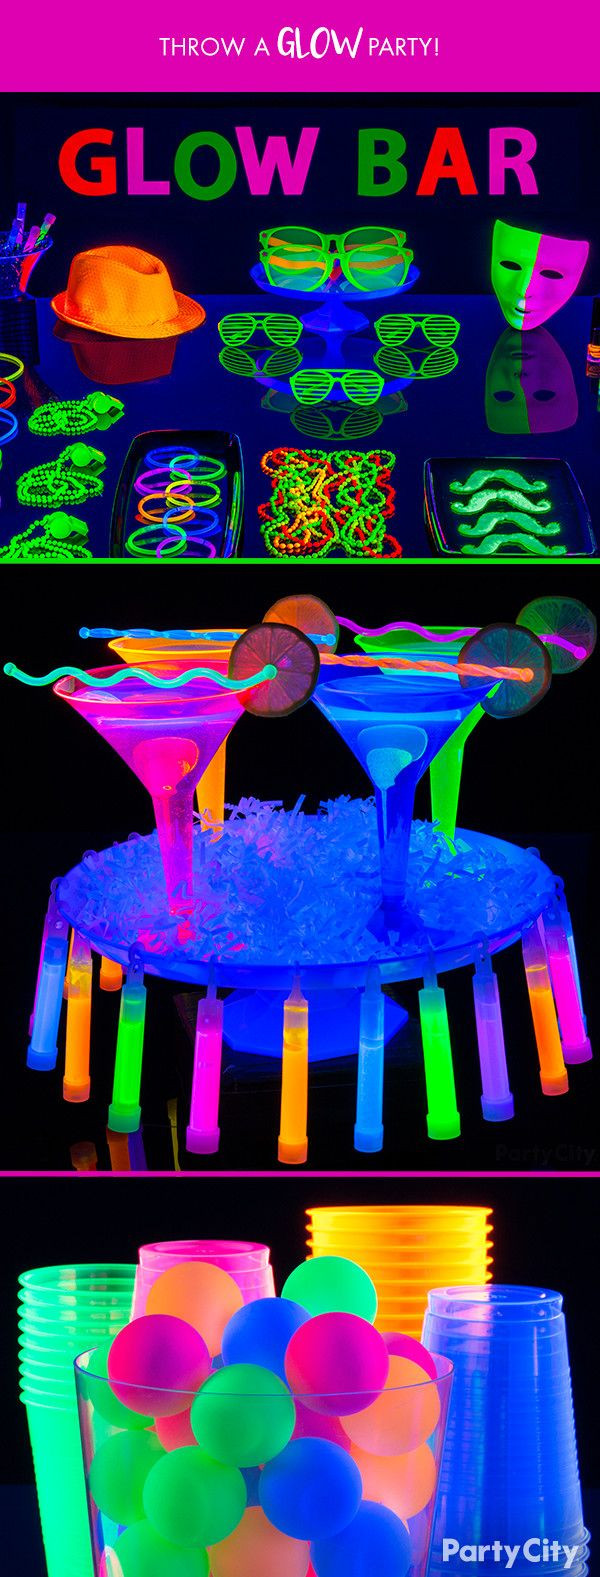 Glow In The Dark Pool Party Ideas
 363 best images about resident events on Pinterest